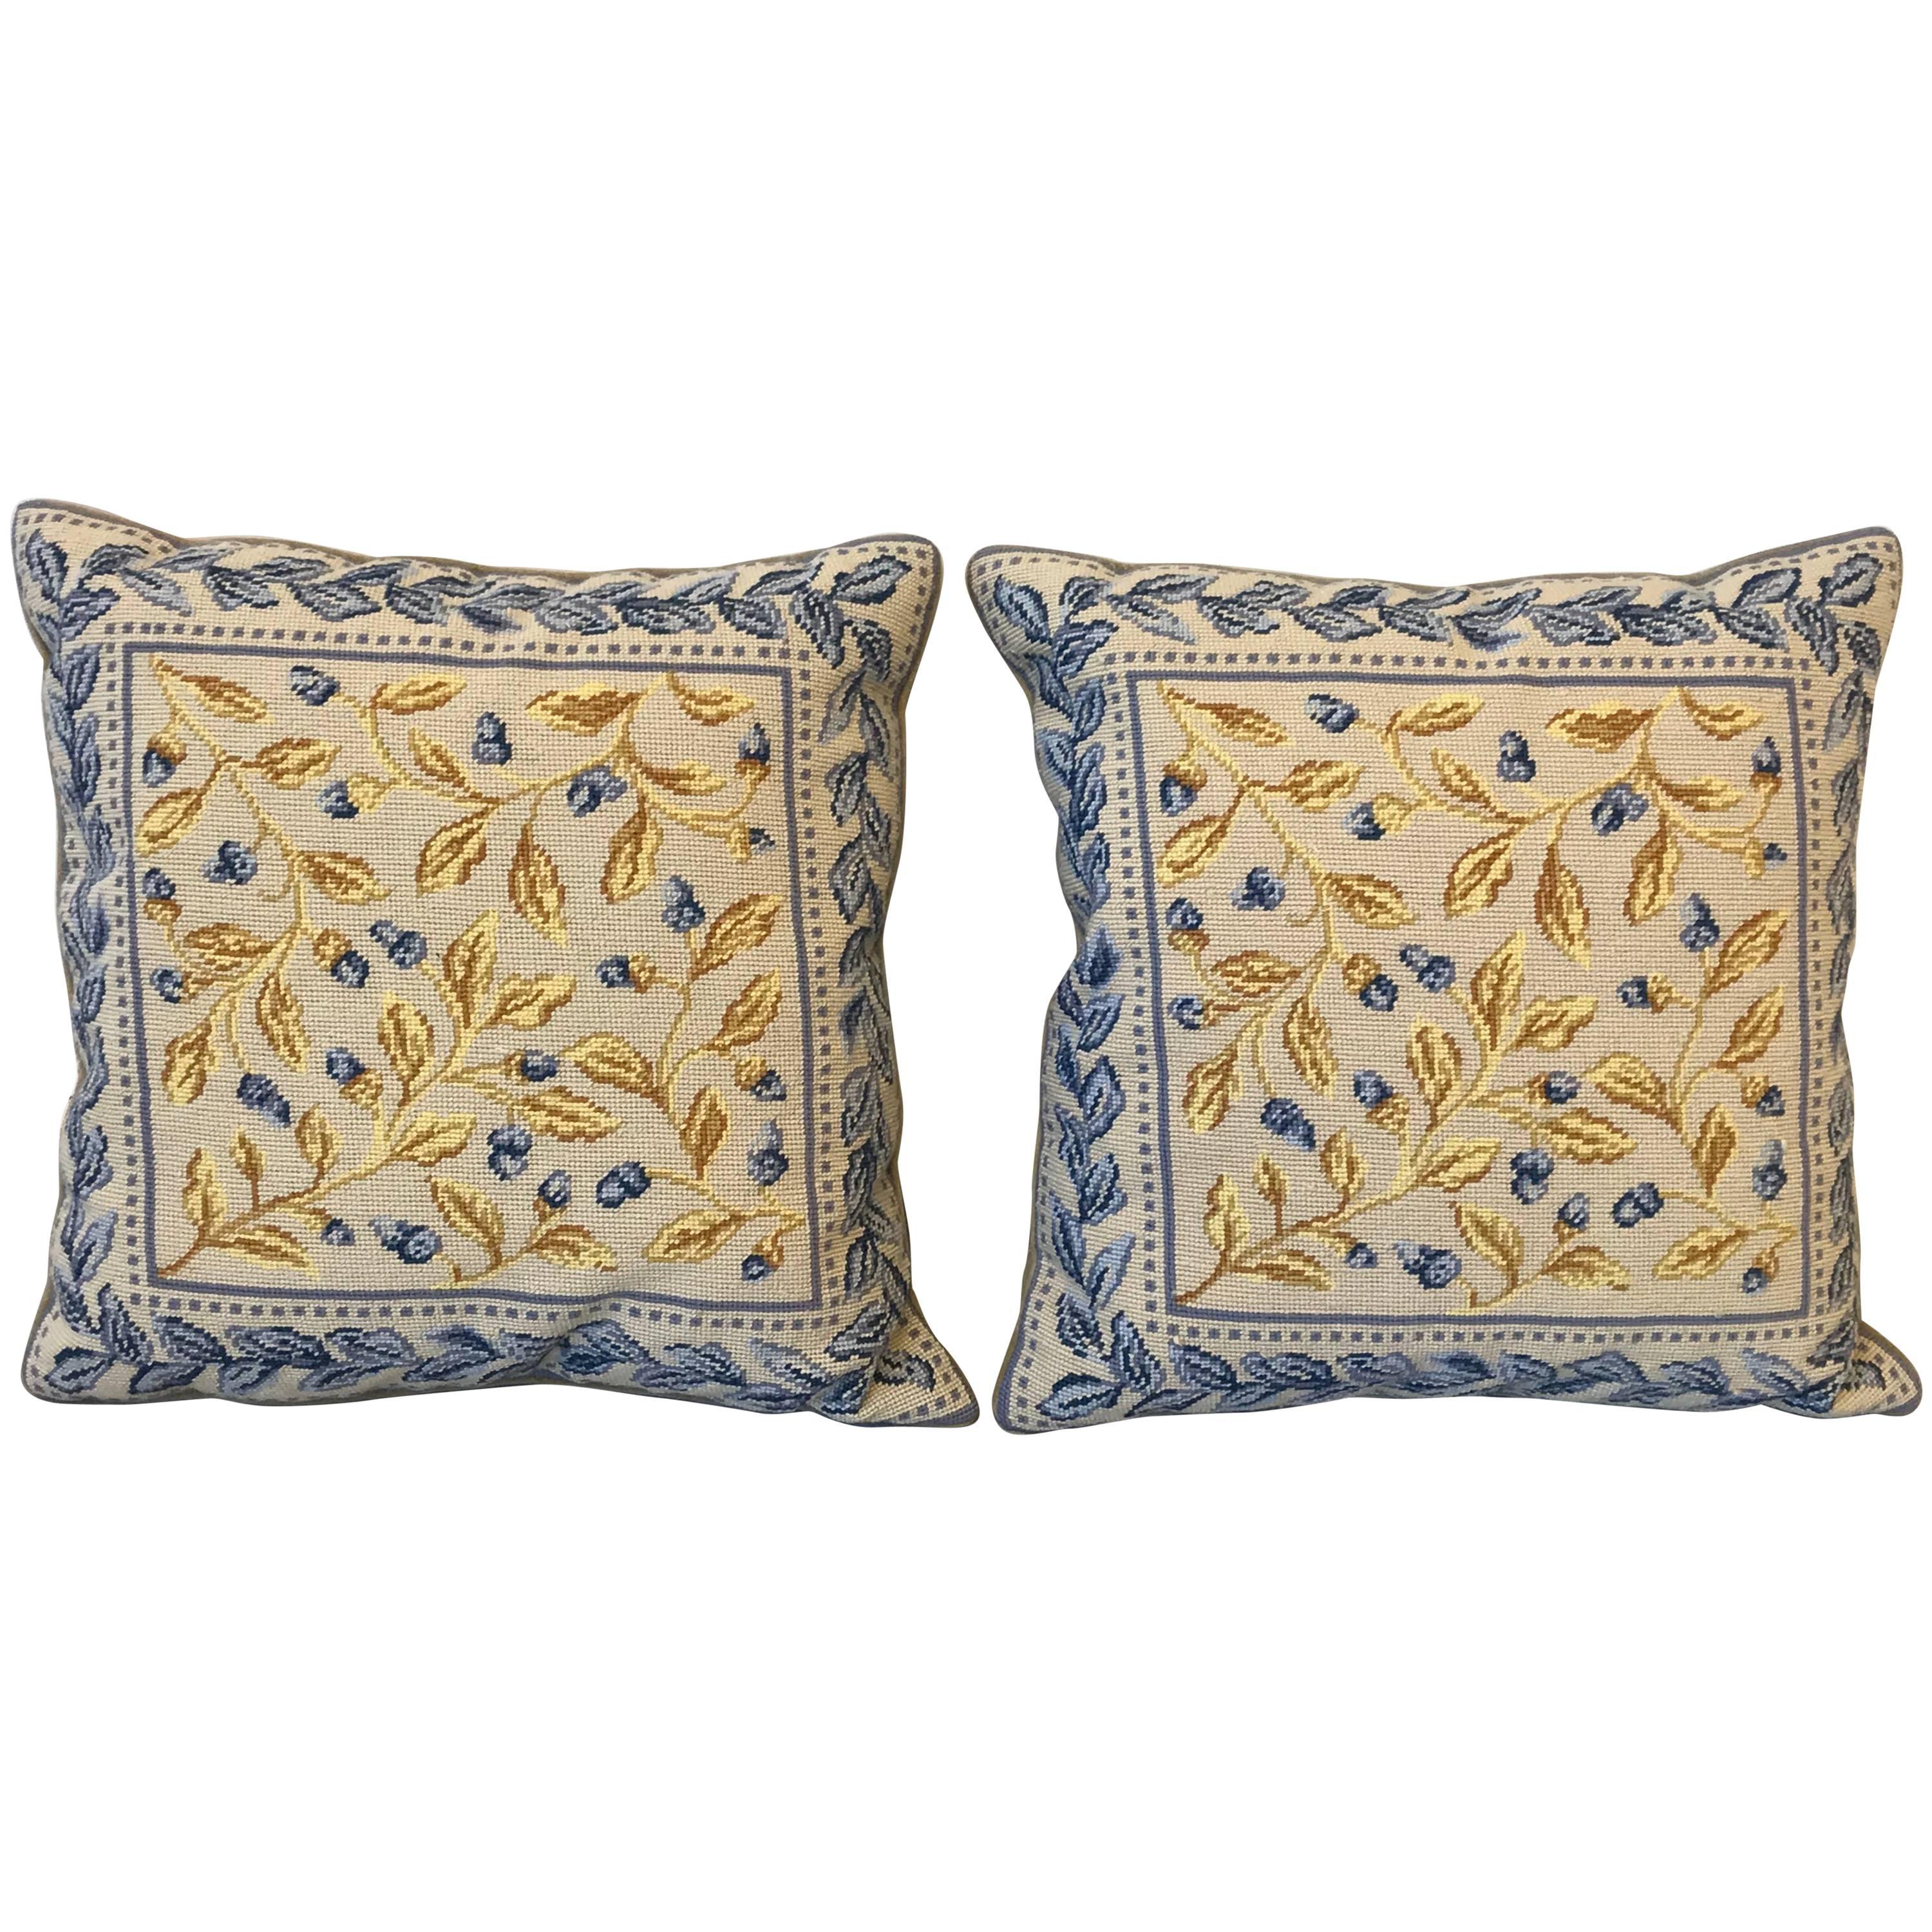 1970s Large Floral Motif Needlepoint Pillows, Pair For Sale